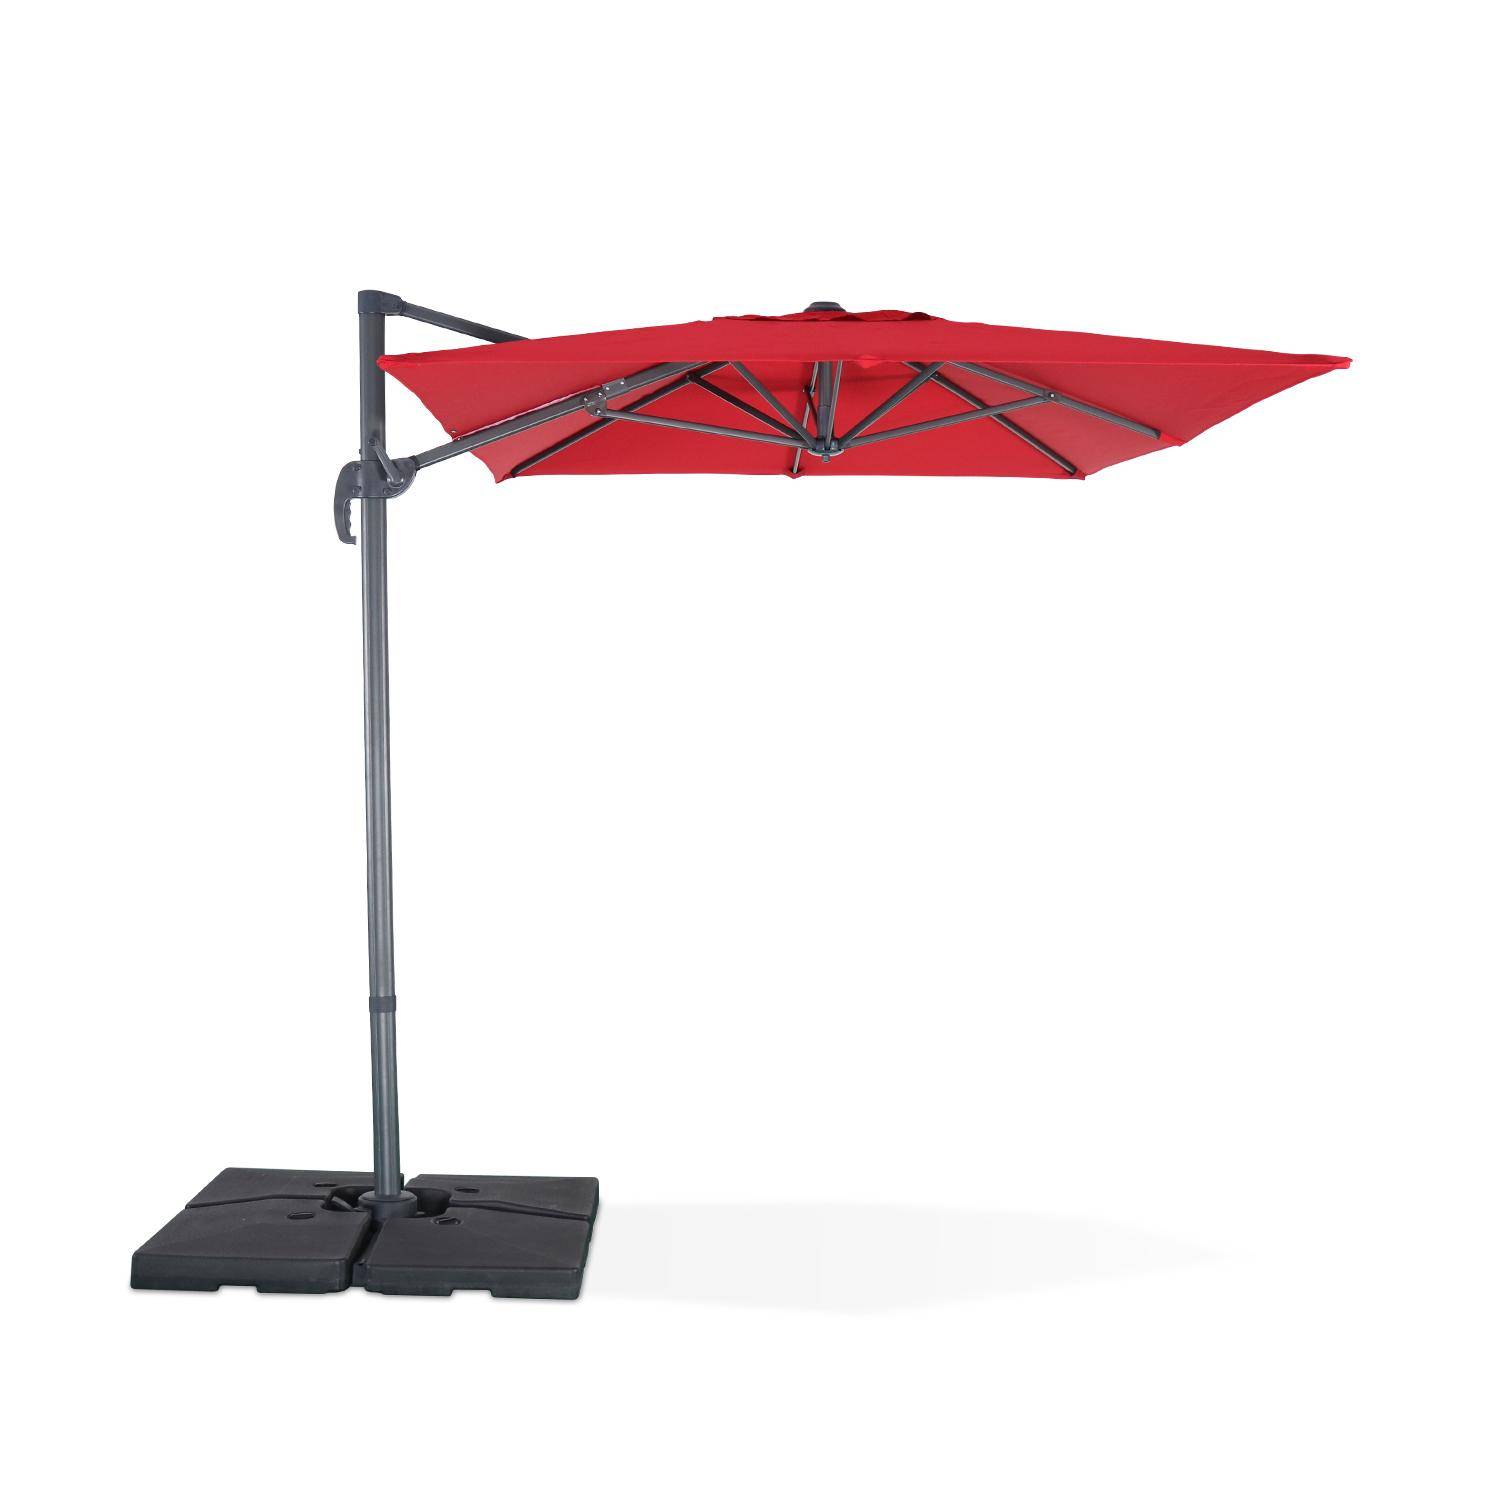 2x3m rectangular cantilever paraso - parasol can be tilted, folded and rotated 360 degreesl - Antibes - Red Photo1